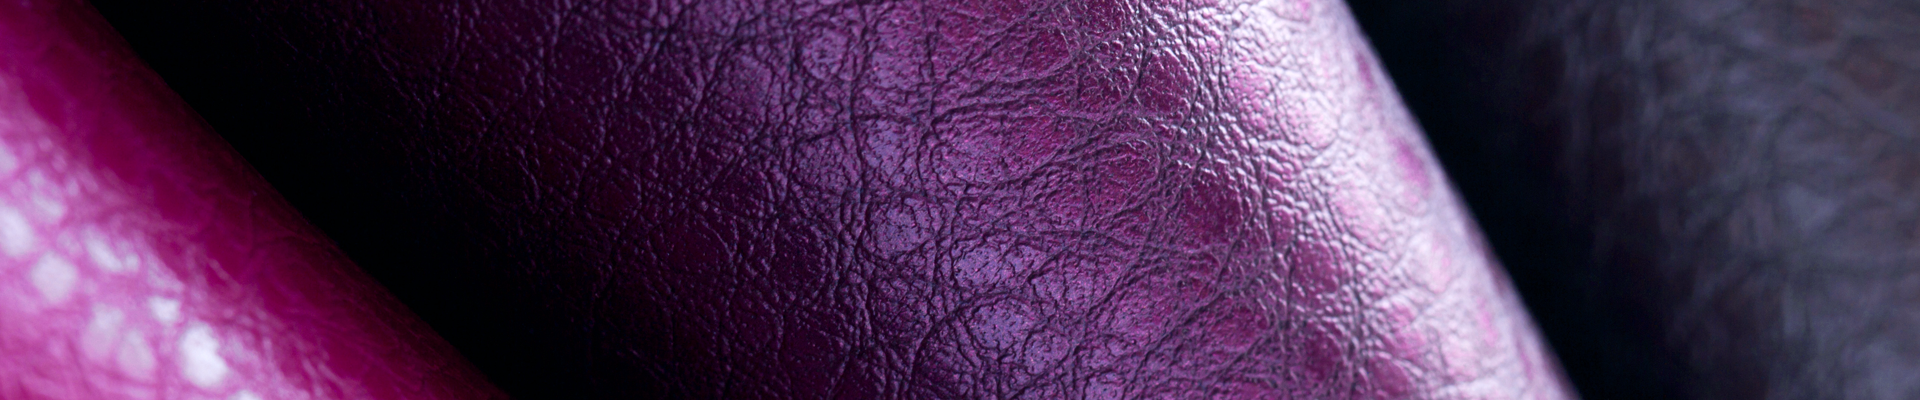 Close up of purple leather